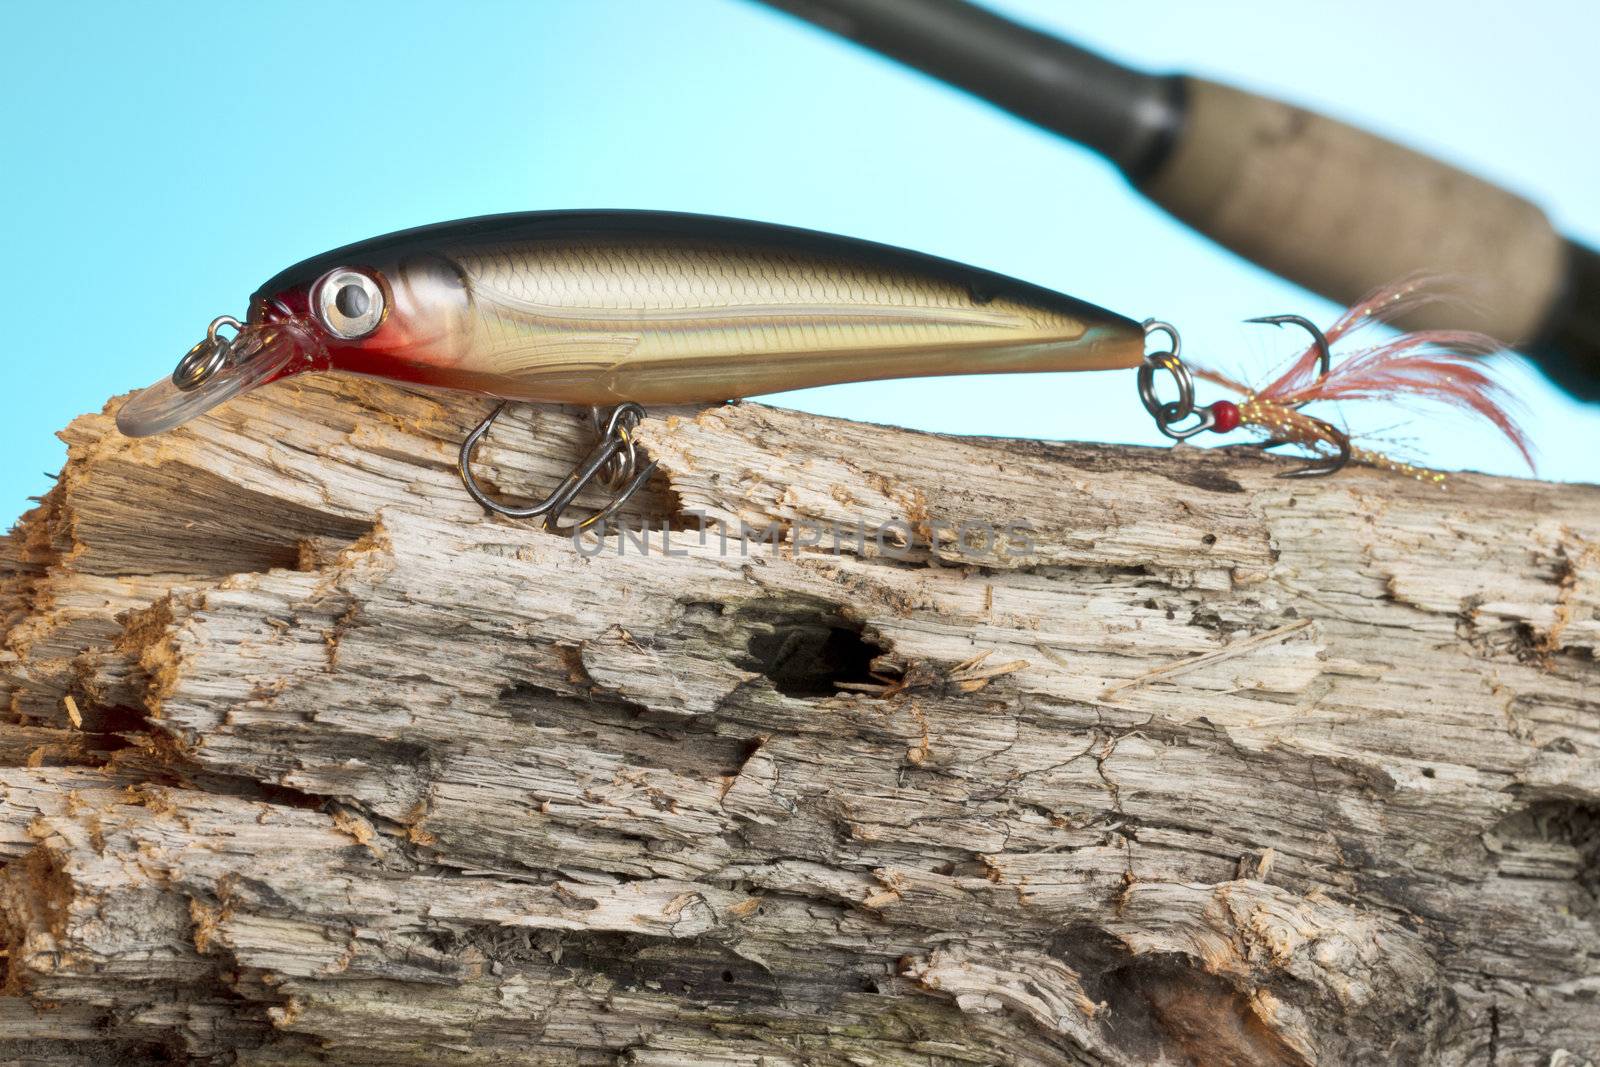 A close up image of a fishing lure on the wood on a blue background